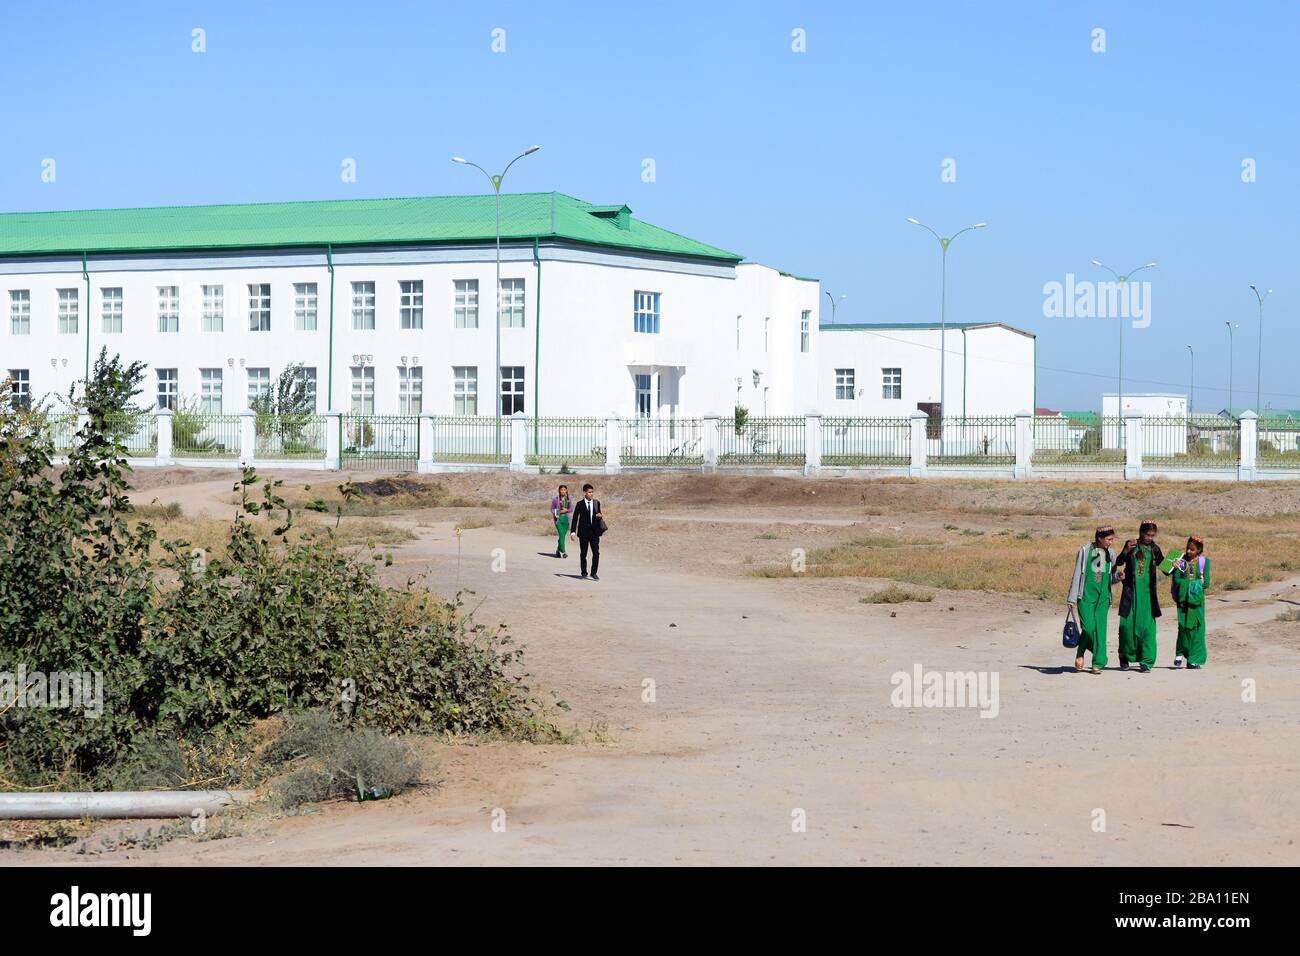 Turkmen school white building with green roof. Local students walking with tradition clothes, the national dress for girls. Dashoguz, Turkmenistan. Stock Photo